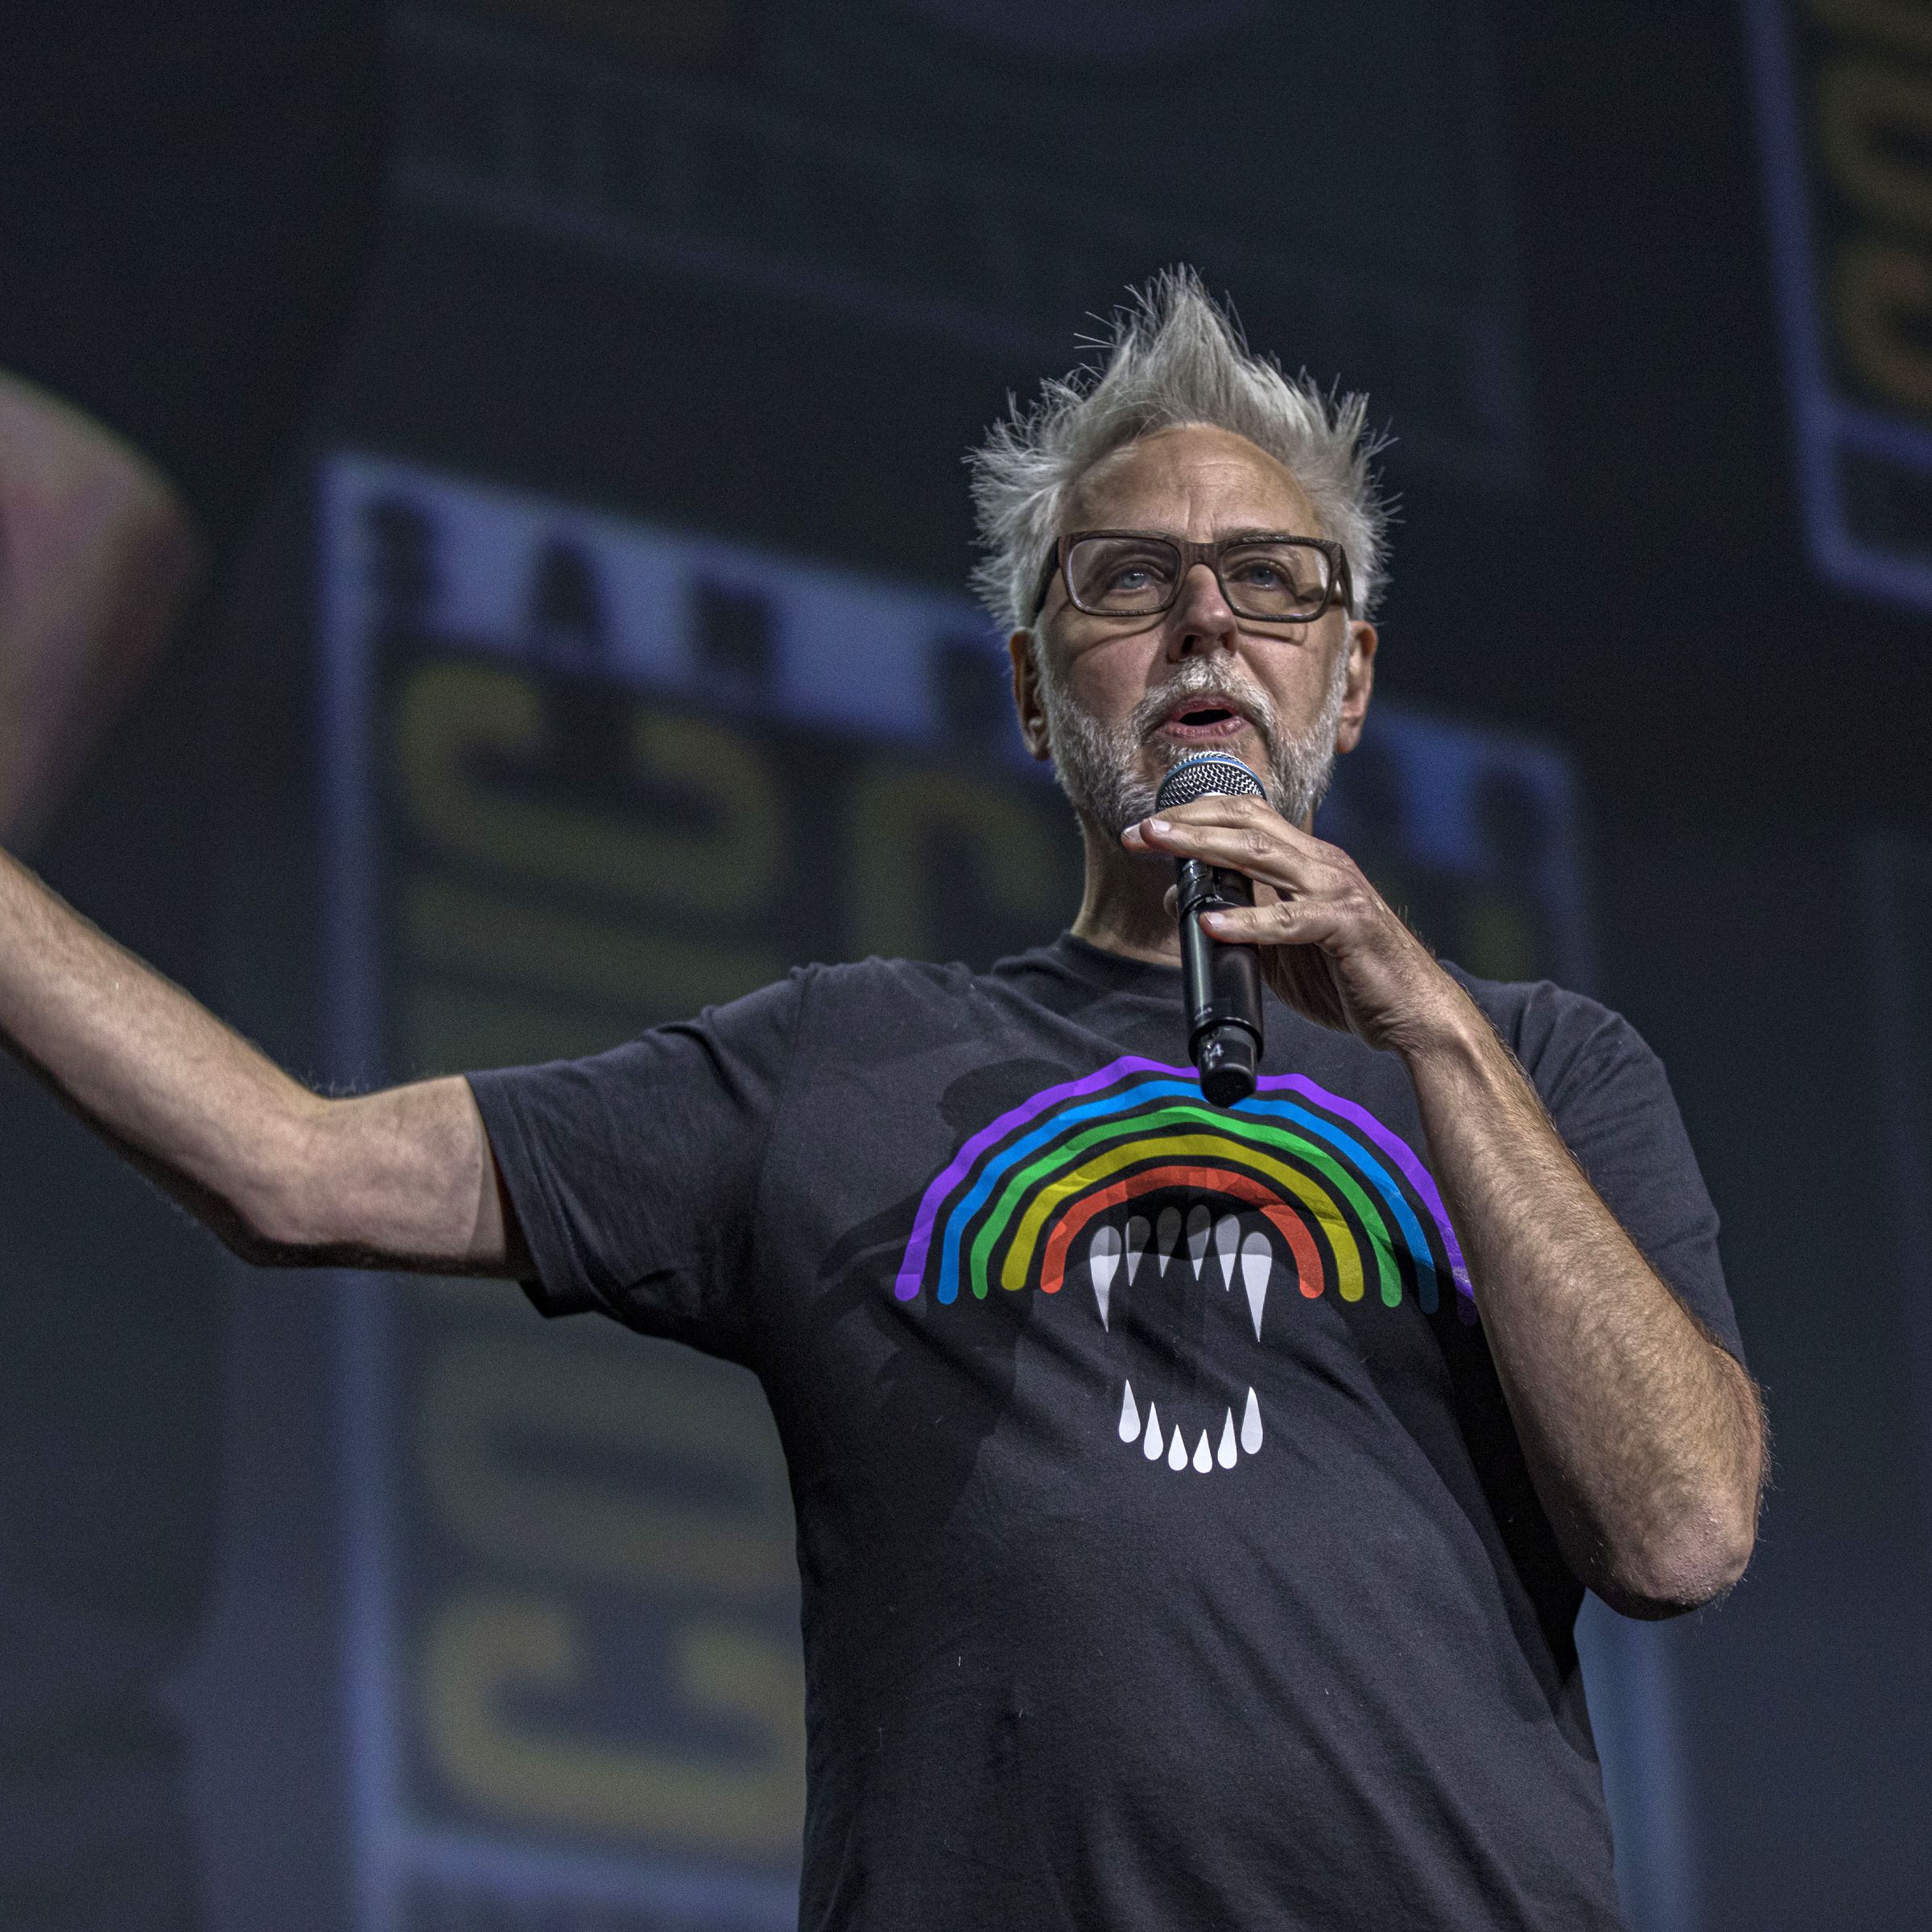 James Gunn wearing a black t-shirt with a rainbow on it as he gestures on stage during a presentation at San Diego Comic-Con in 2022.